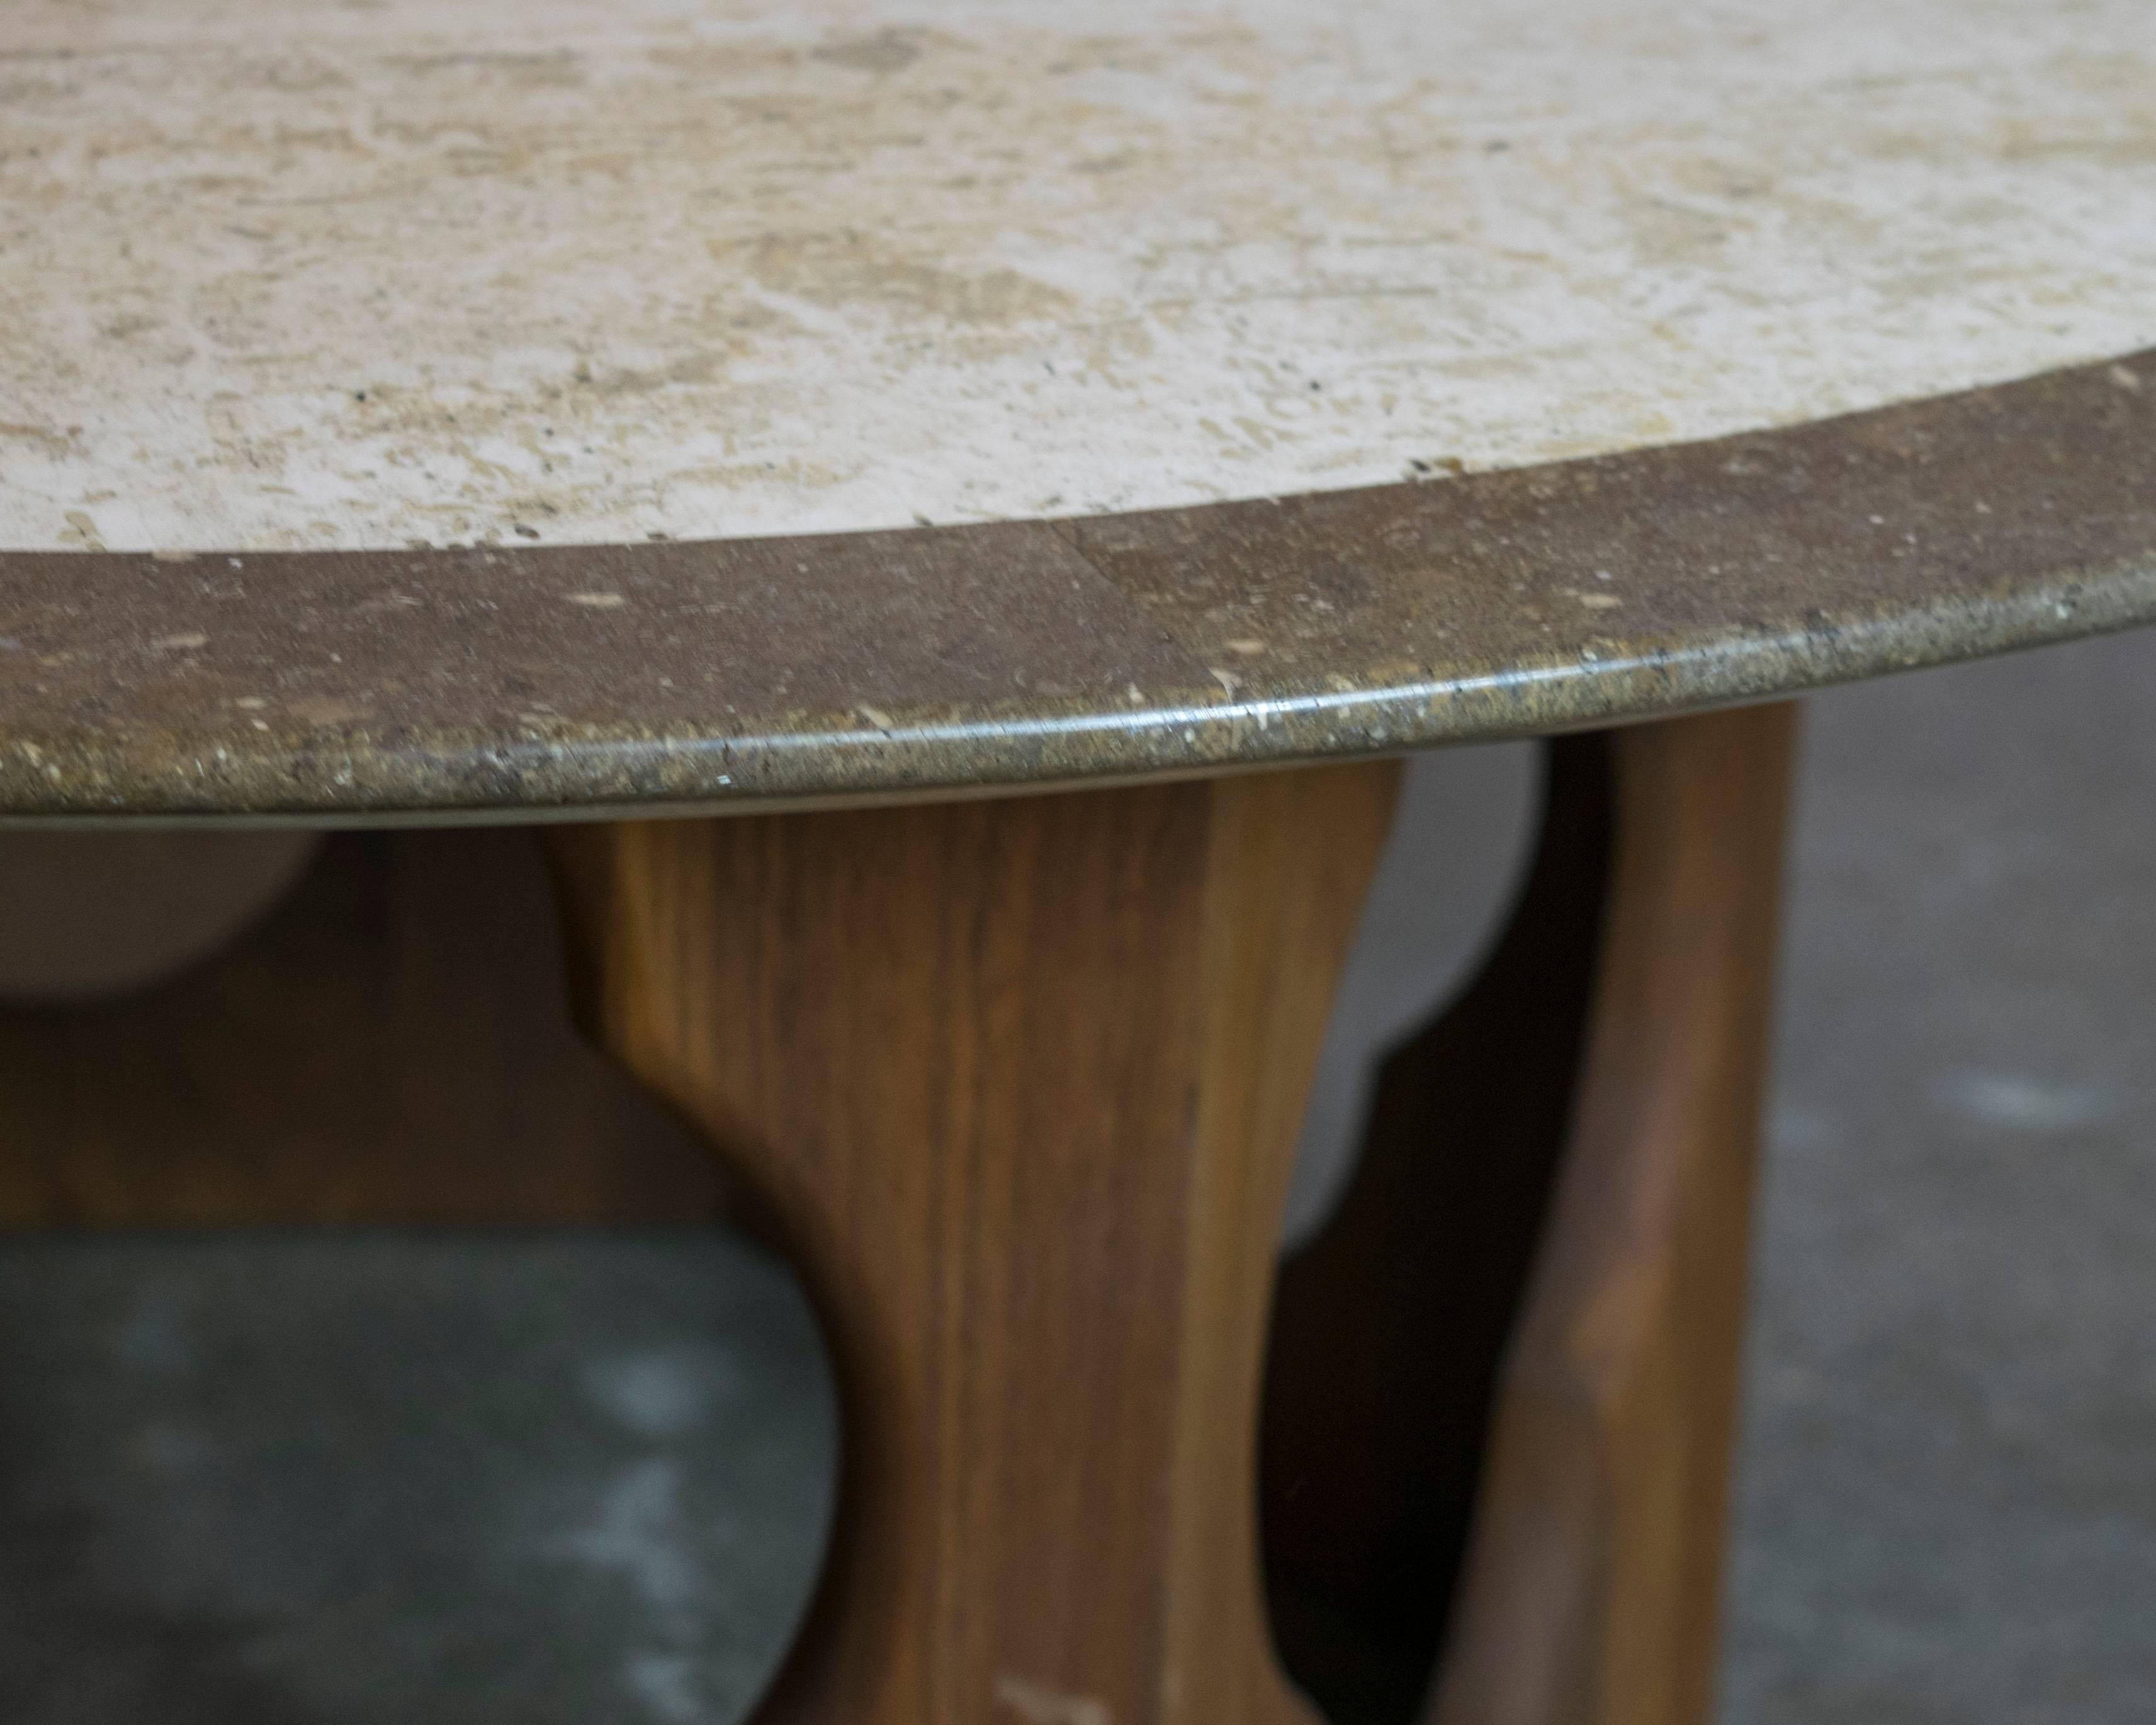 Harvey Probber's creations are characteristically elegant and beautifully executed and this table is no exception. The heavily grained black walnut hexagon base has intricate cut-out details. The top is made of travertine and marble with a circular